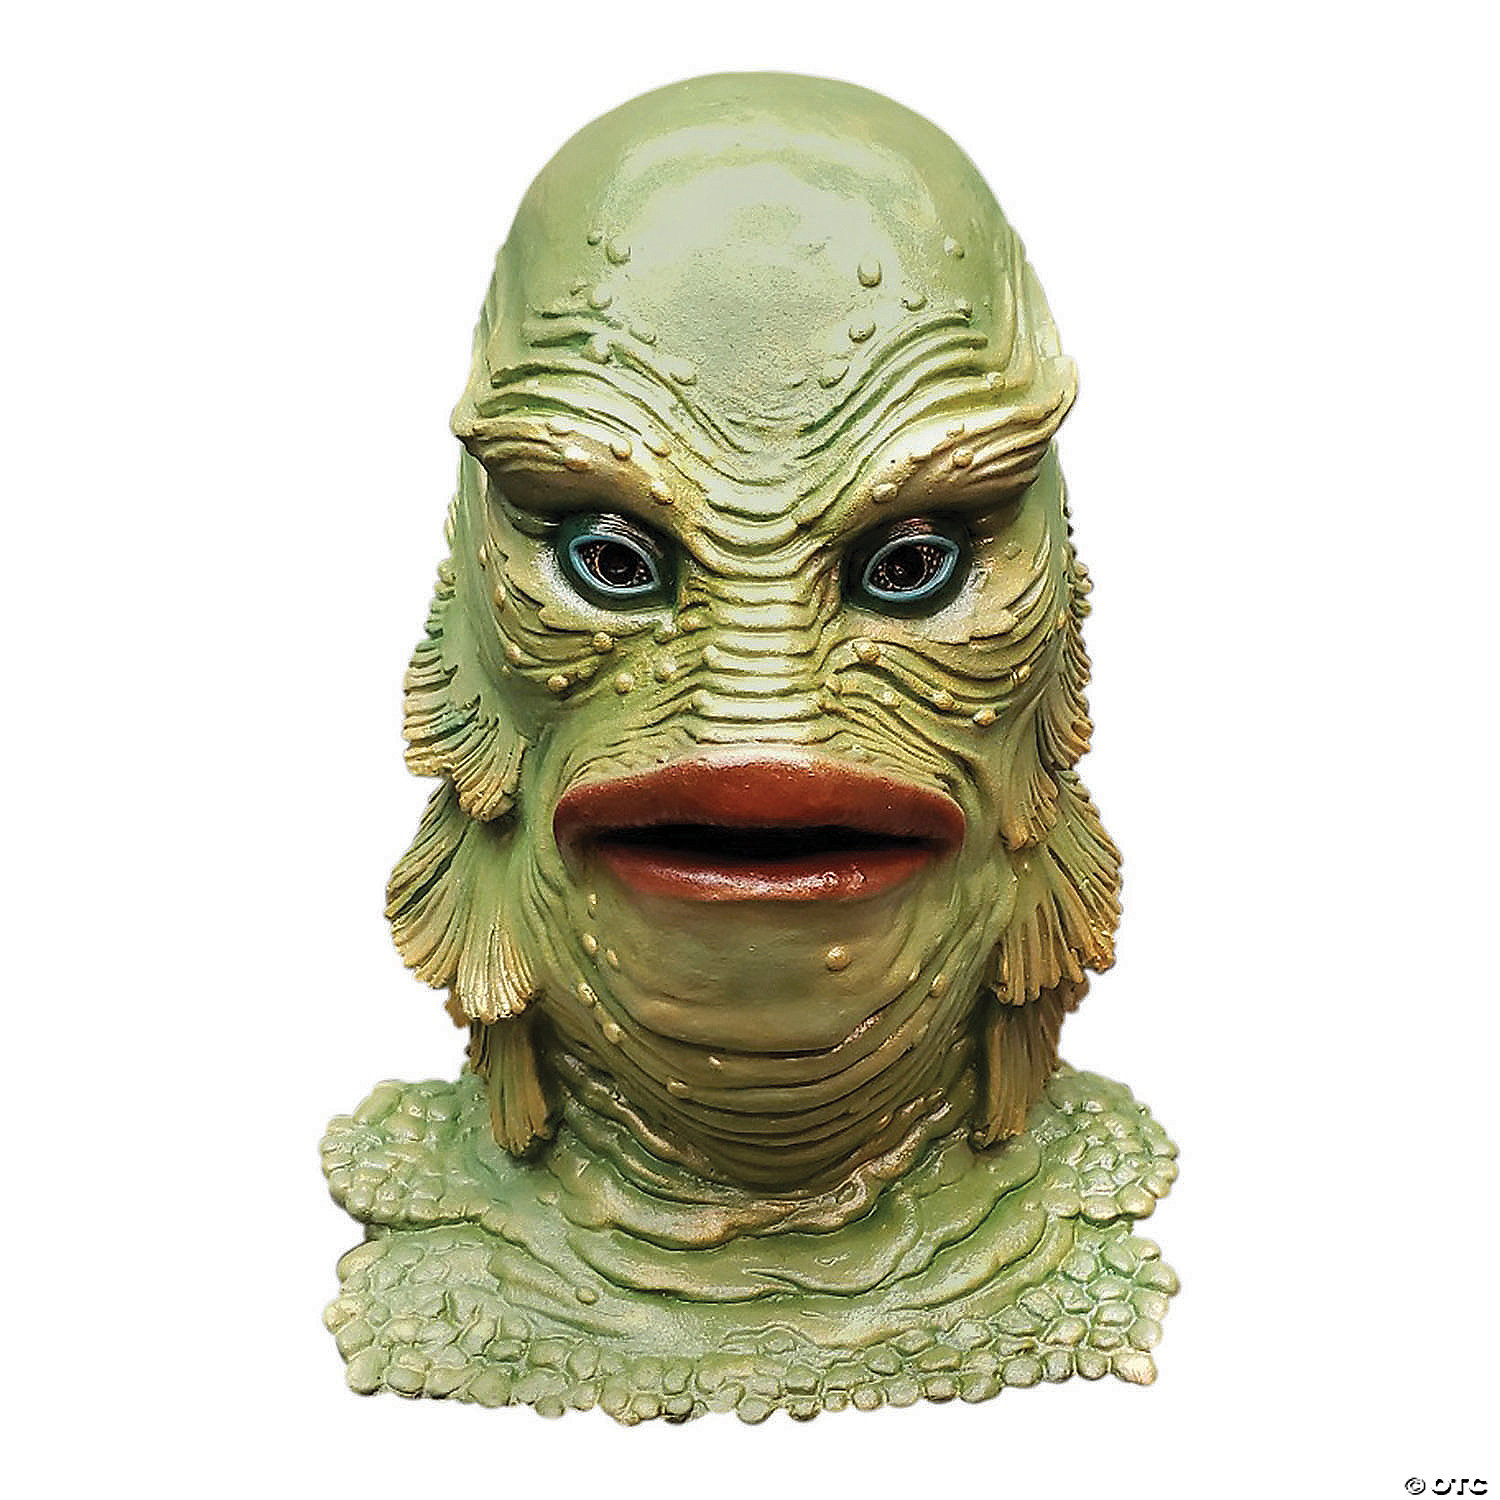 [Image: creature-from-the-black-lagoon-halloween-mask~13969600]